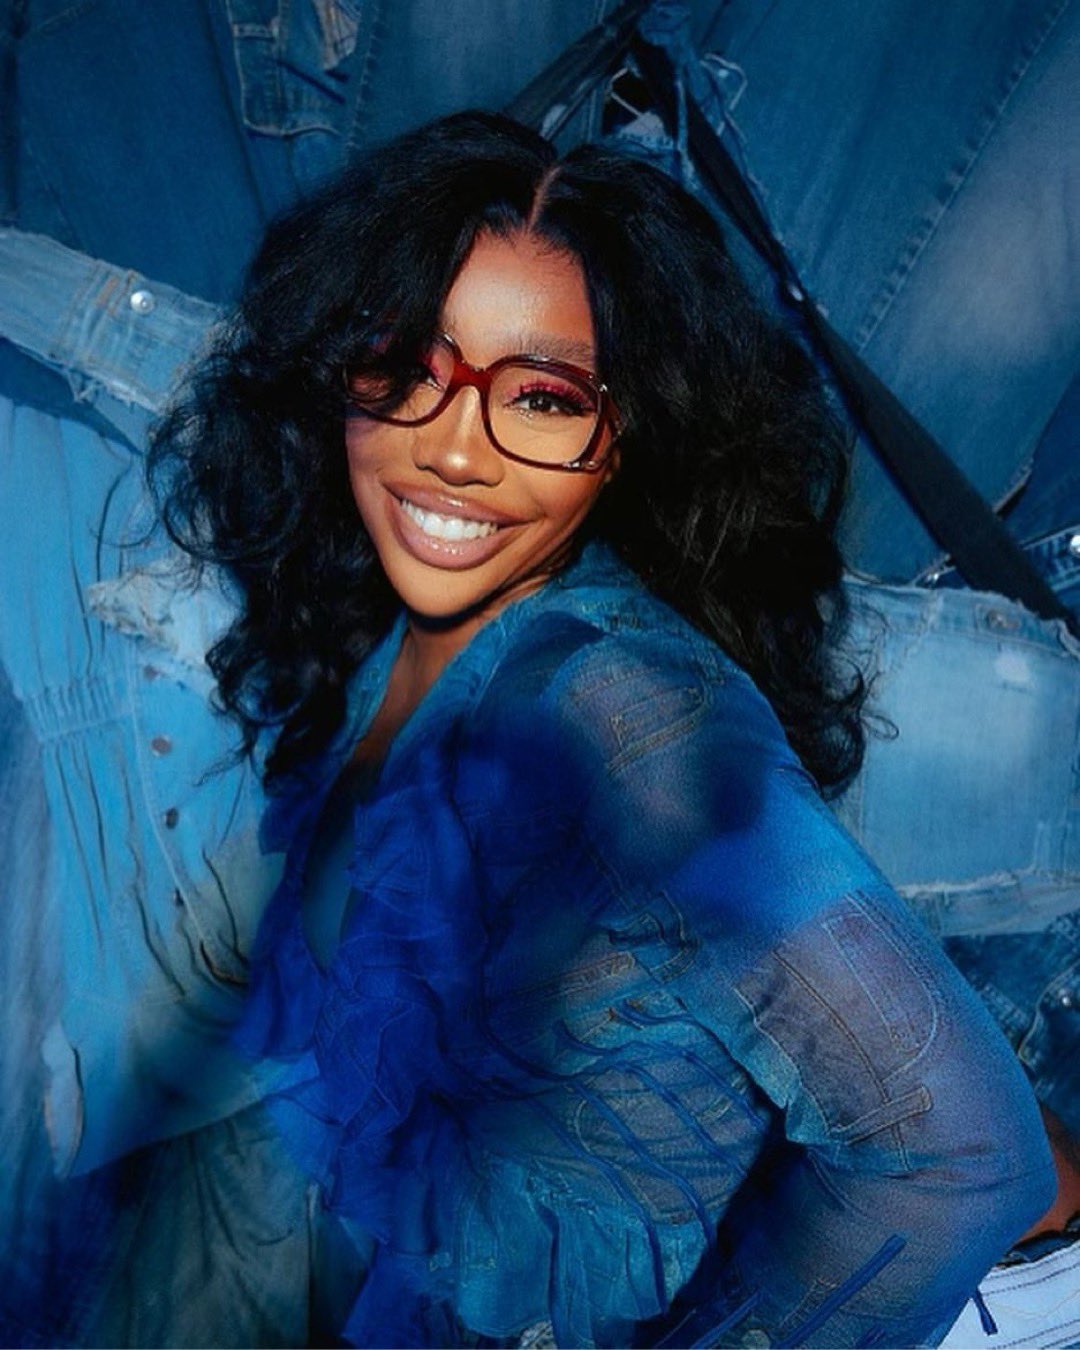 Is American Singer SZA Related To Lizzo?